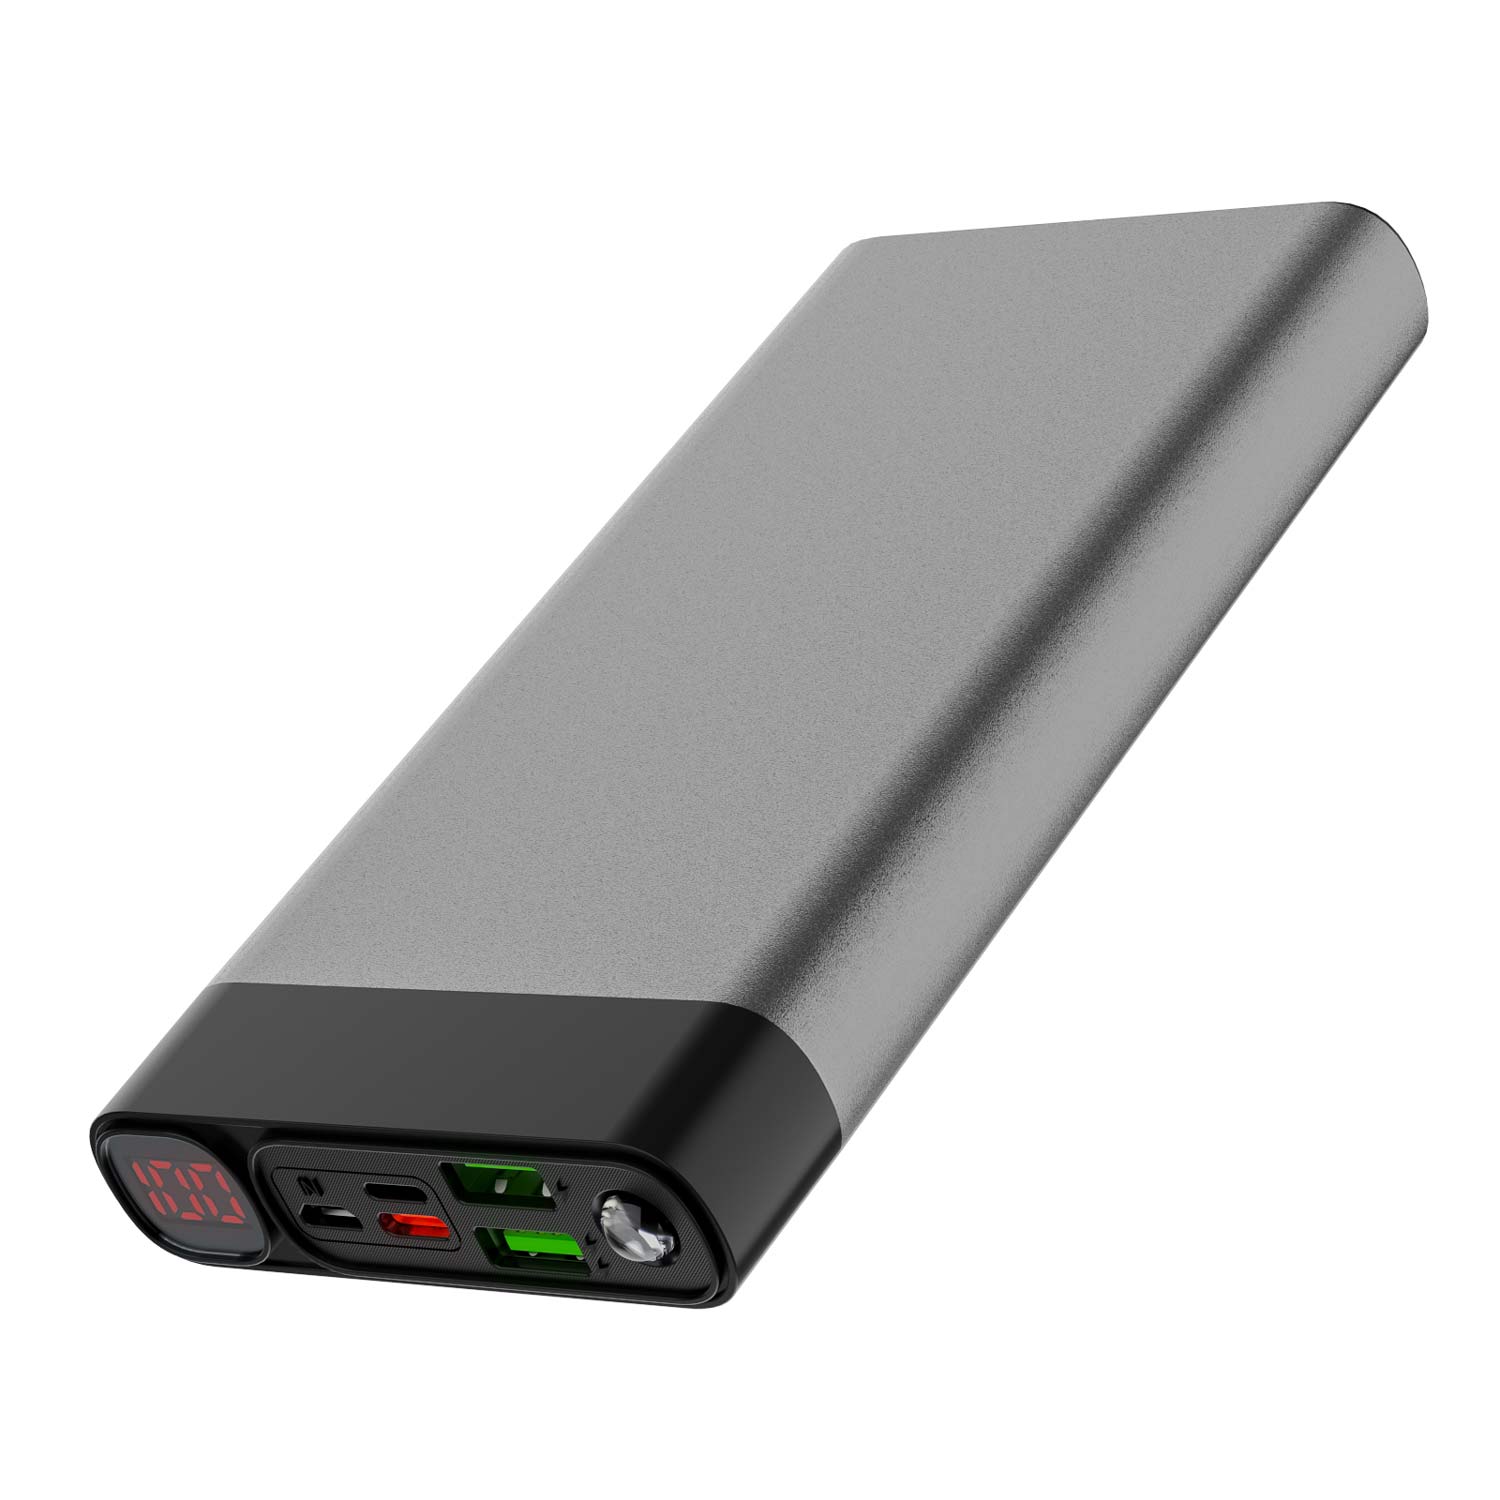 ELEFULL-Portable Power Bank, 26800mAh with QC3.0 22.5W & USB C PD20W Fast Charger in Secure Metal Case, LED Display, Flashlight - Compact & Stylish Chargers for Phones & Tablets.